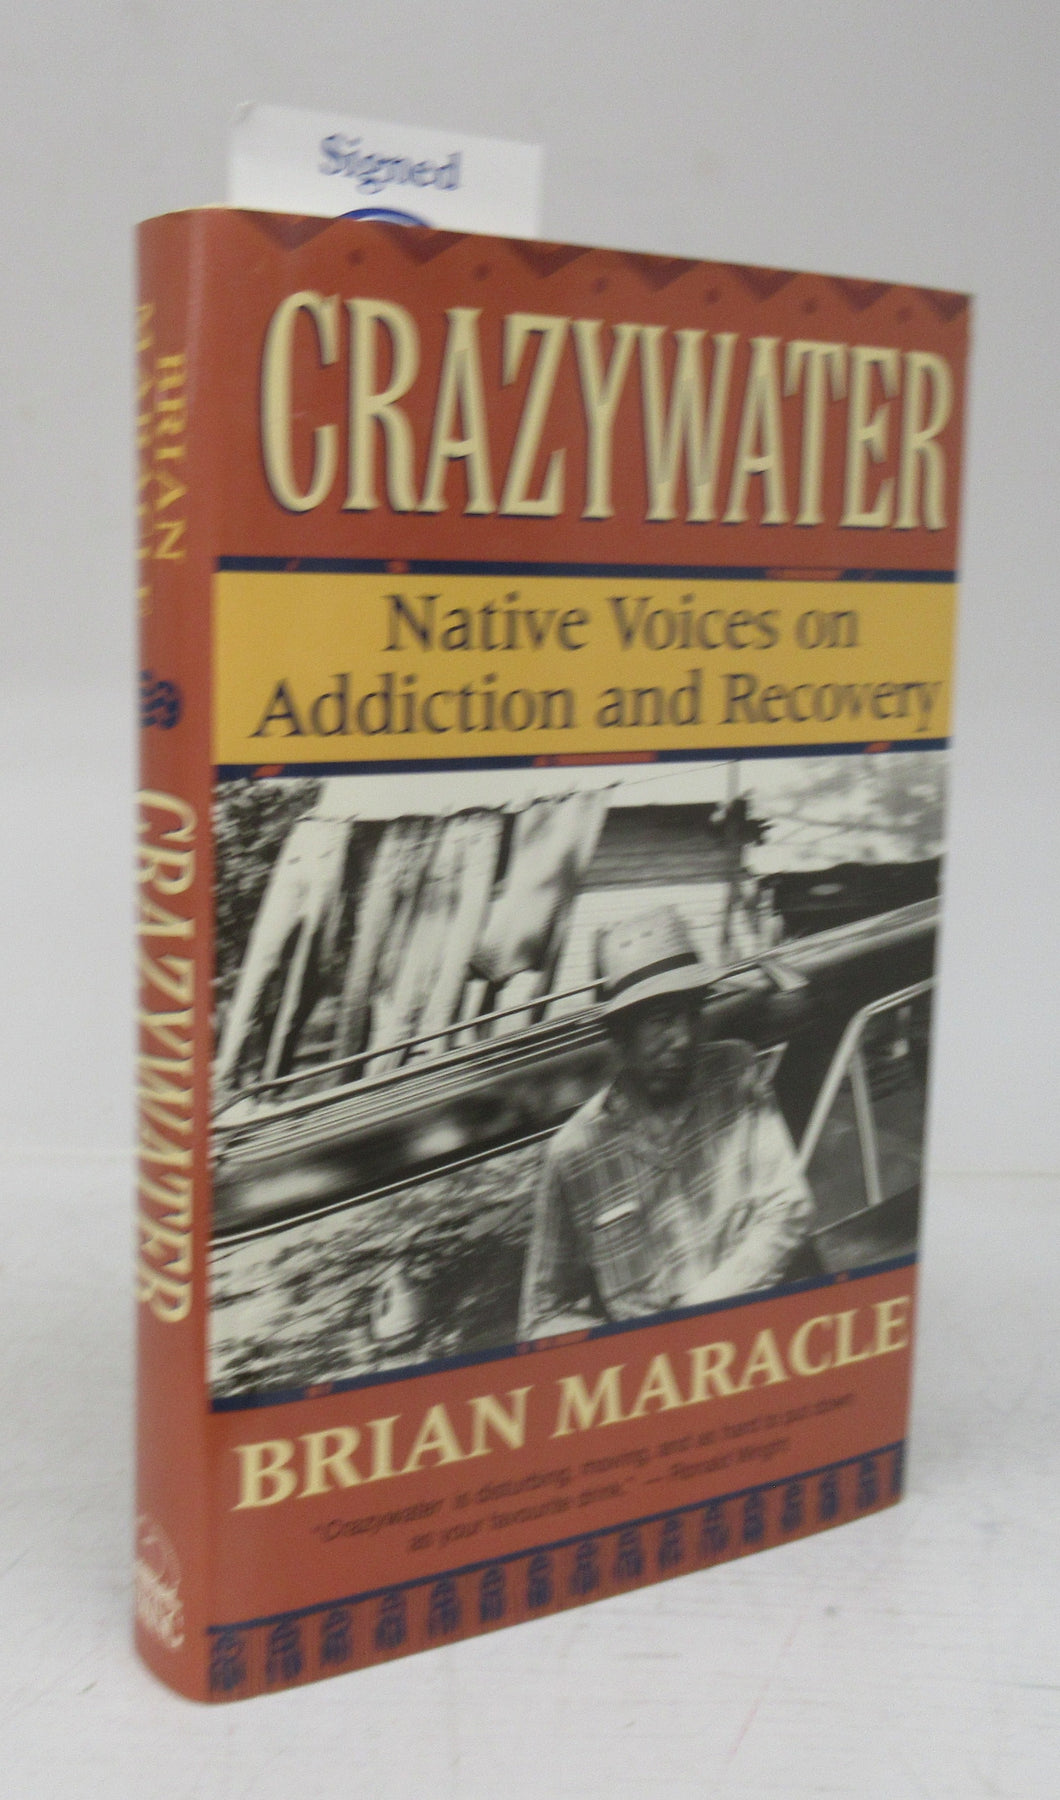 Crazywater: Native Voices on Addiction and Recovery